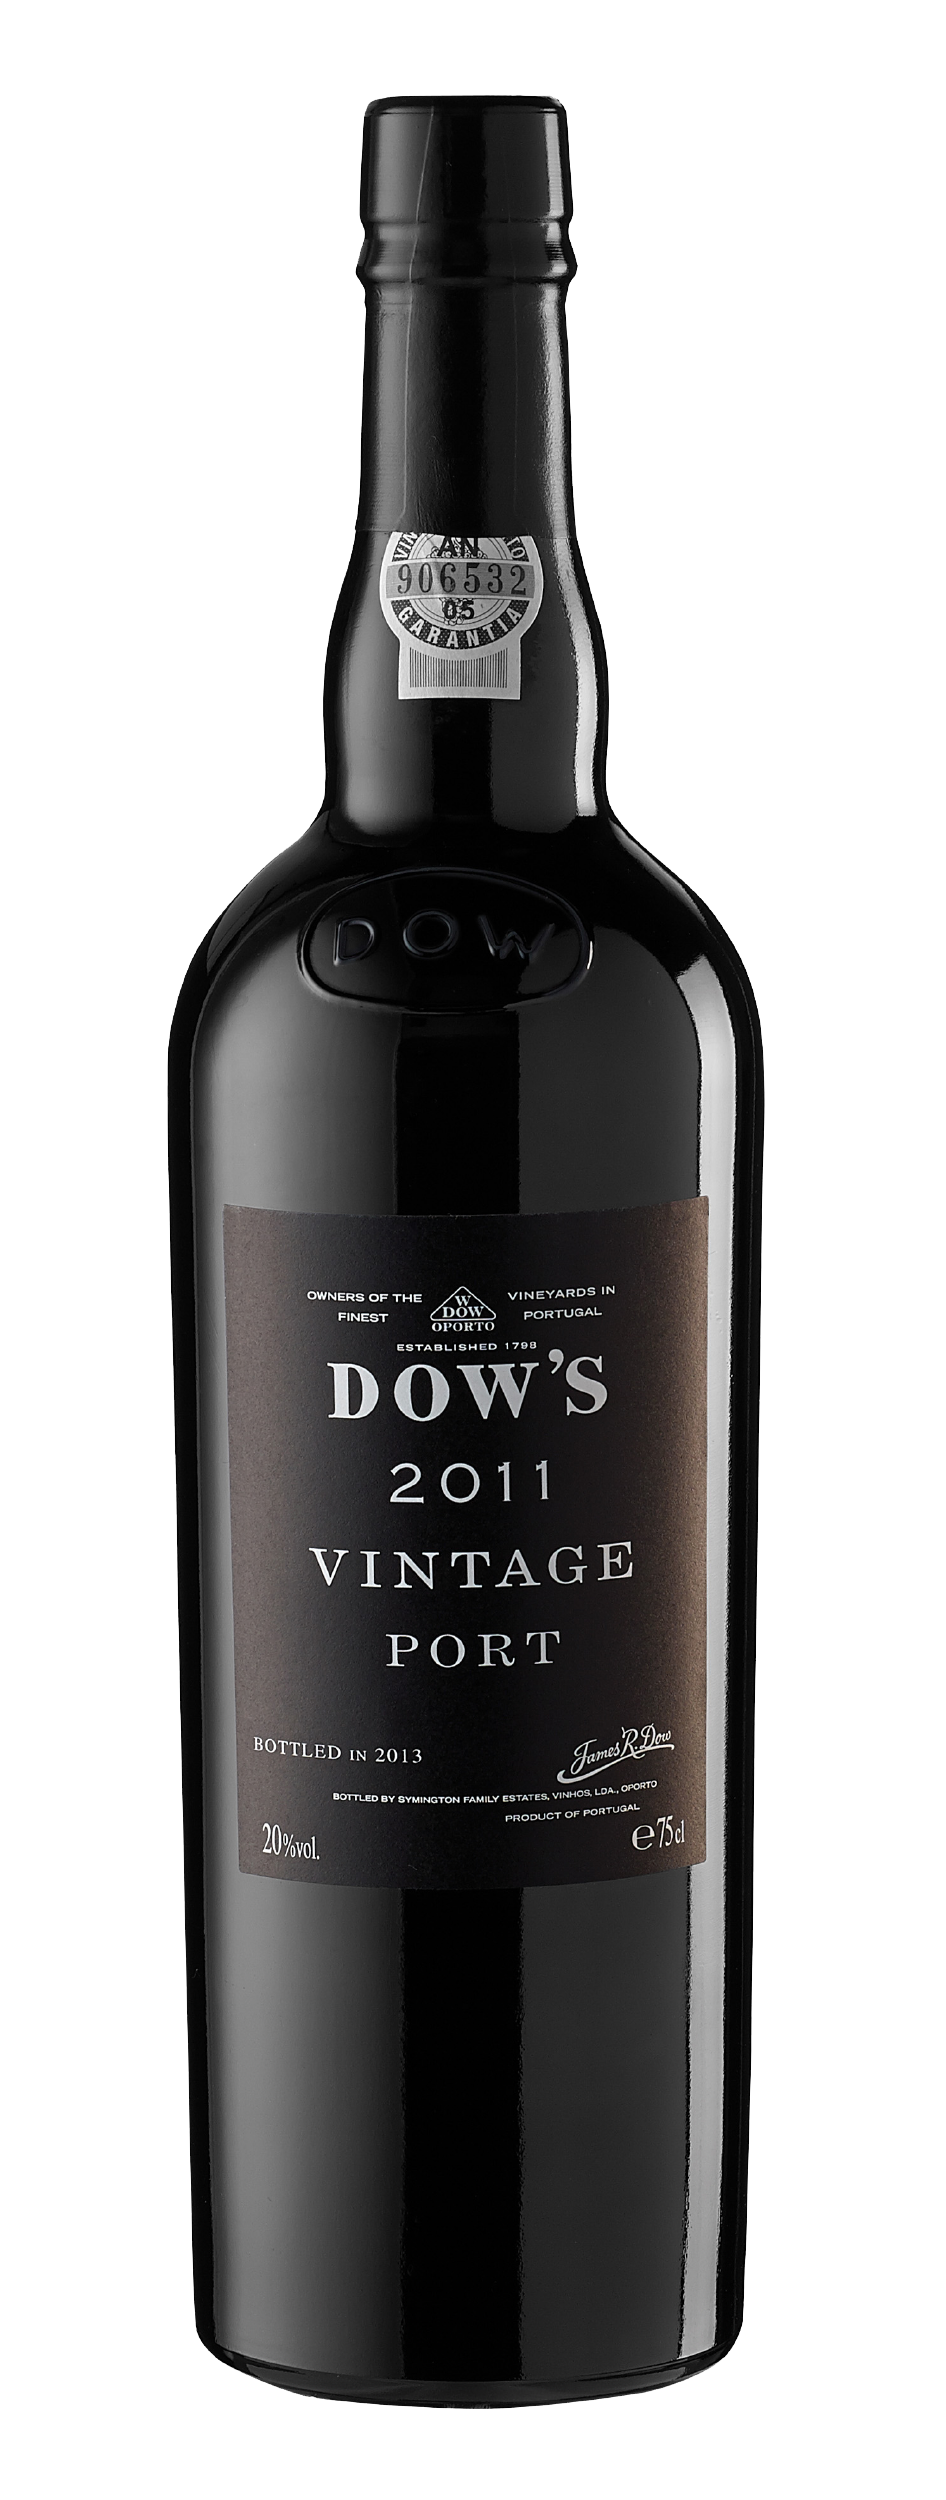 Product Image for DOW'S VINTAGE PORT 2011